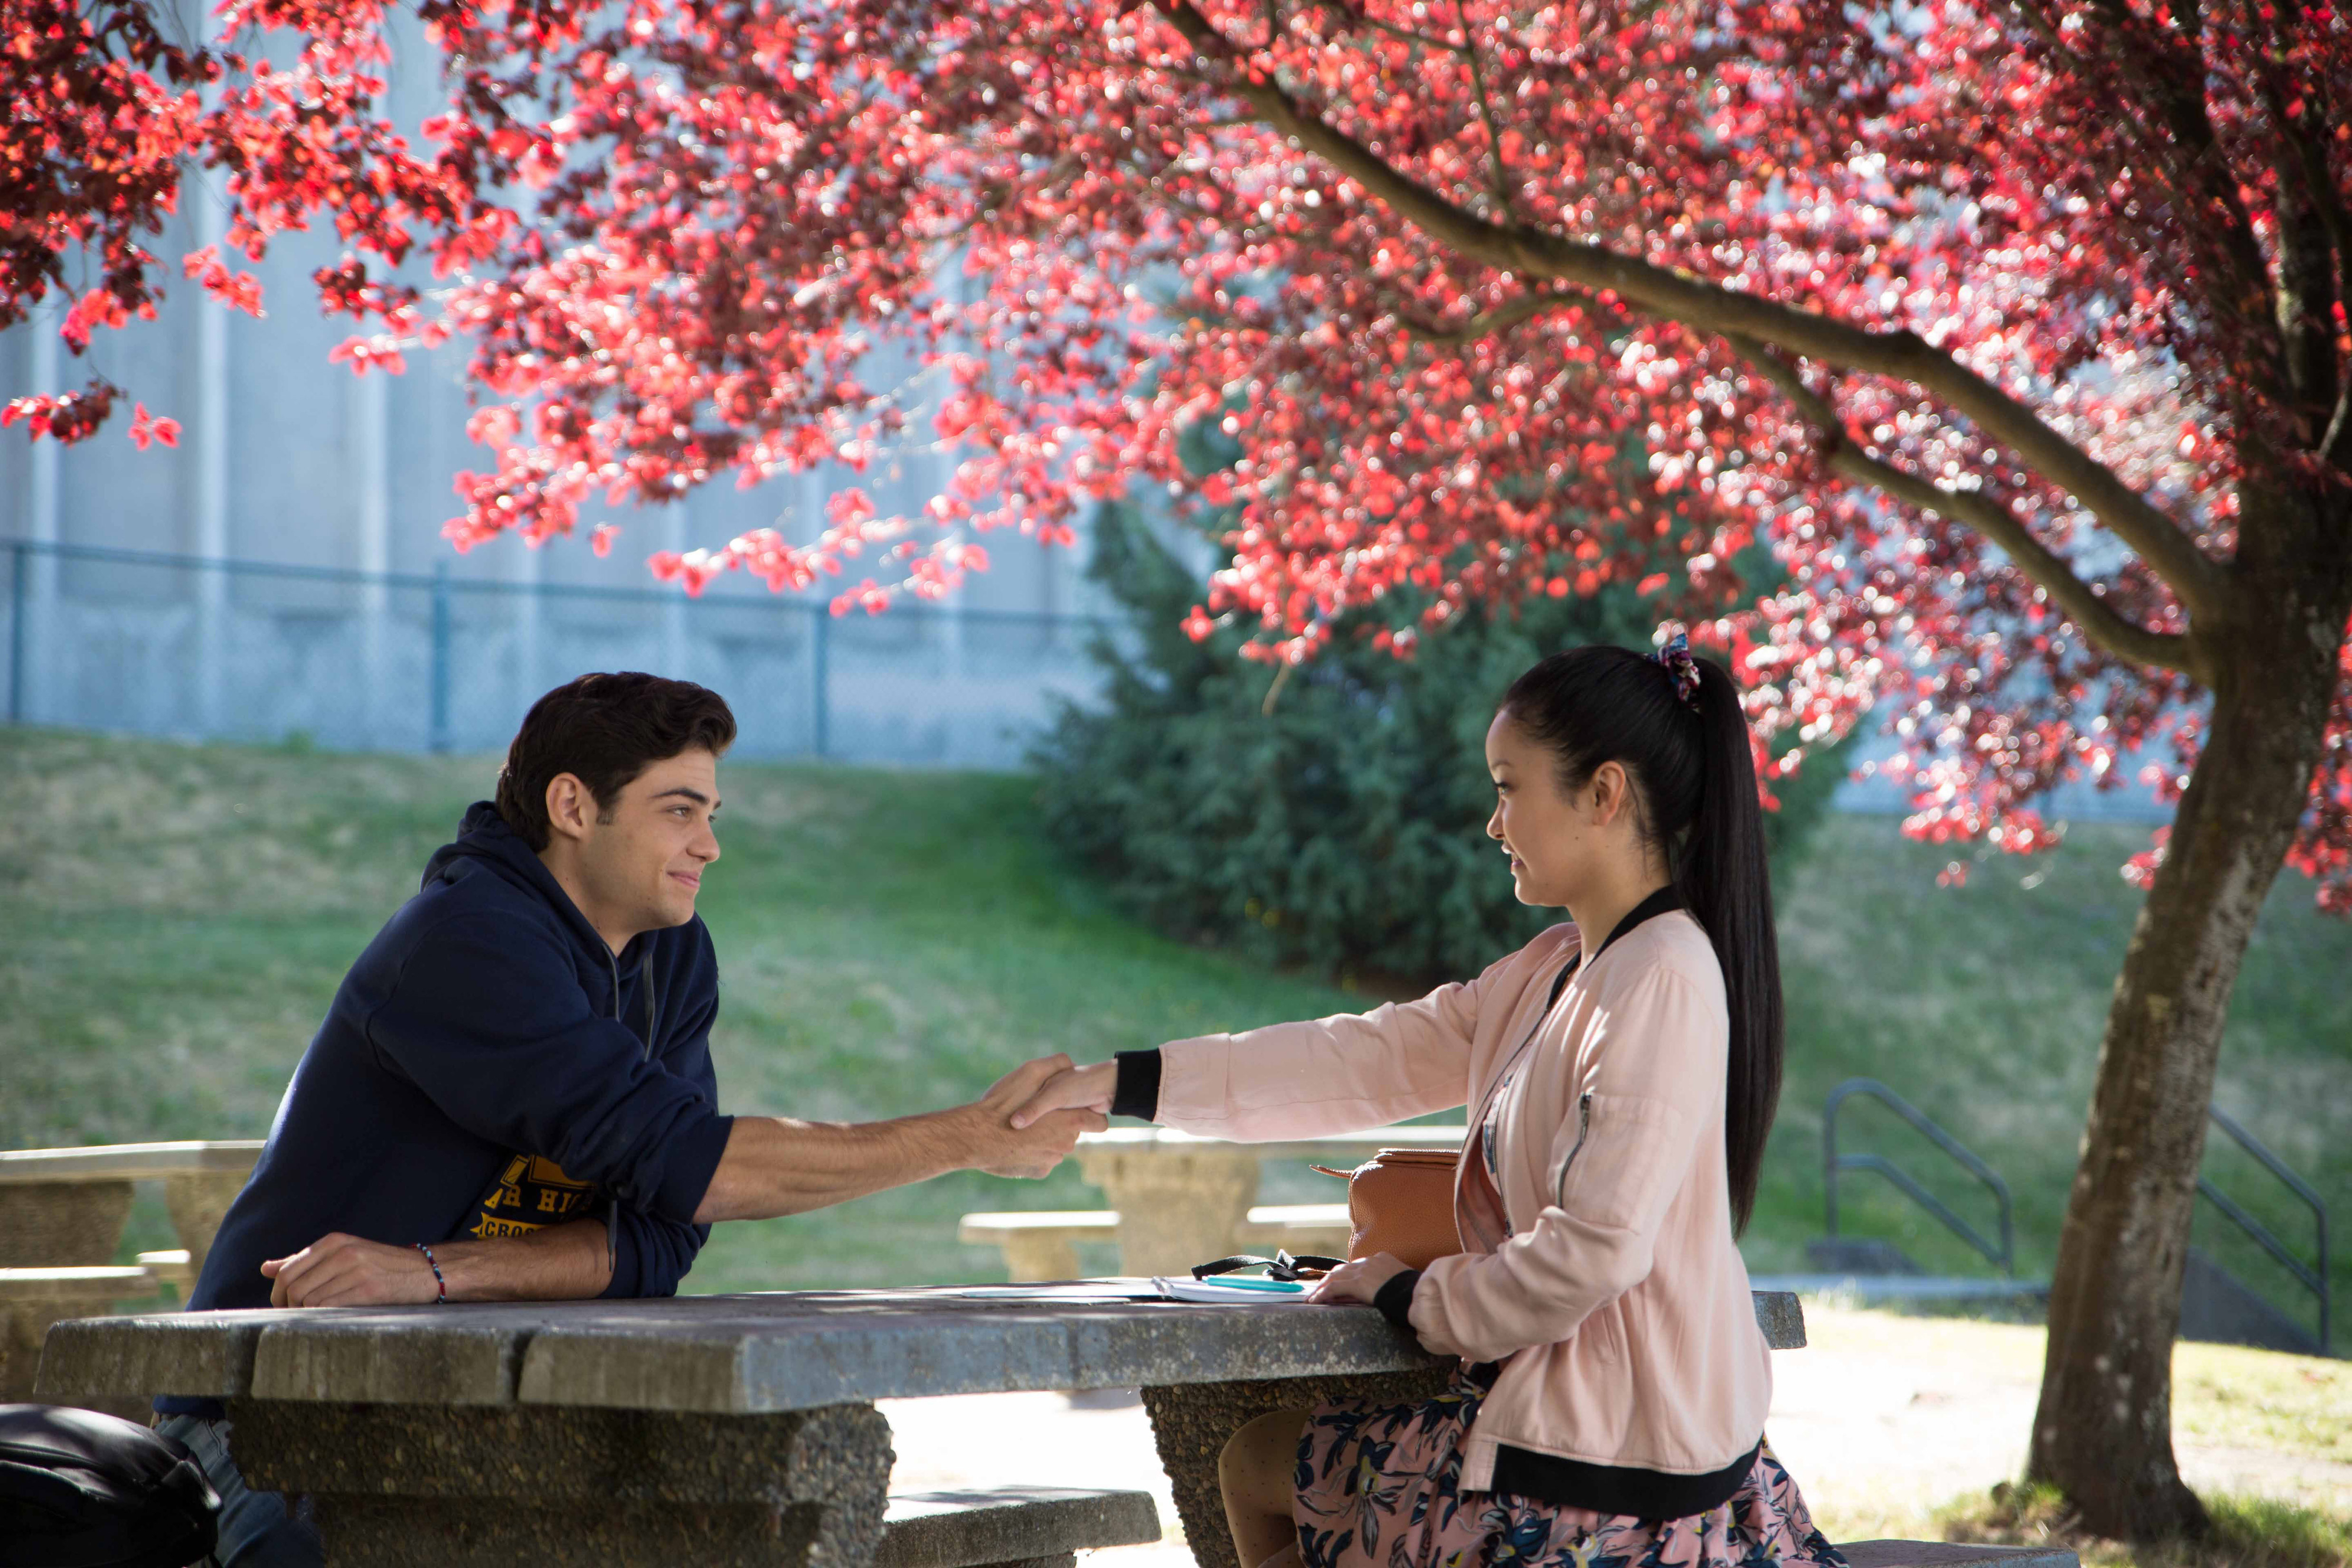 Peter and Lara Jean, sitting at a stone table under a flowering tree, reaching out for a handshake